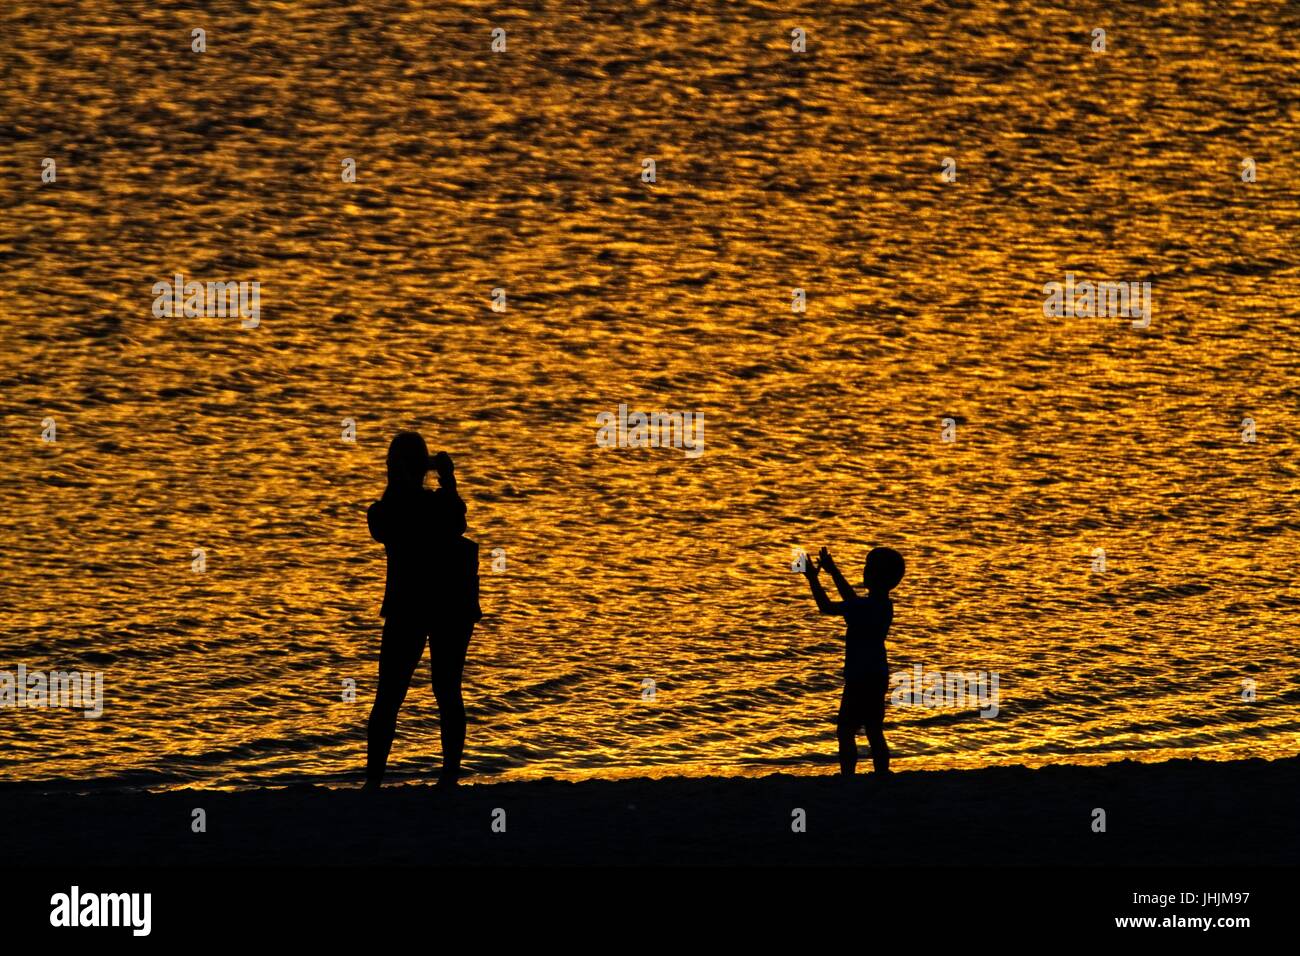 Golden sunset. Seaside. Silhouettes of mother and child. Stock Photo